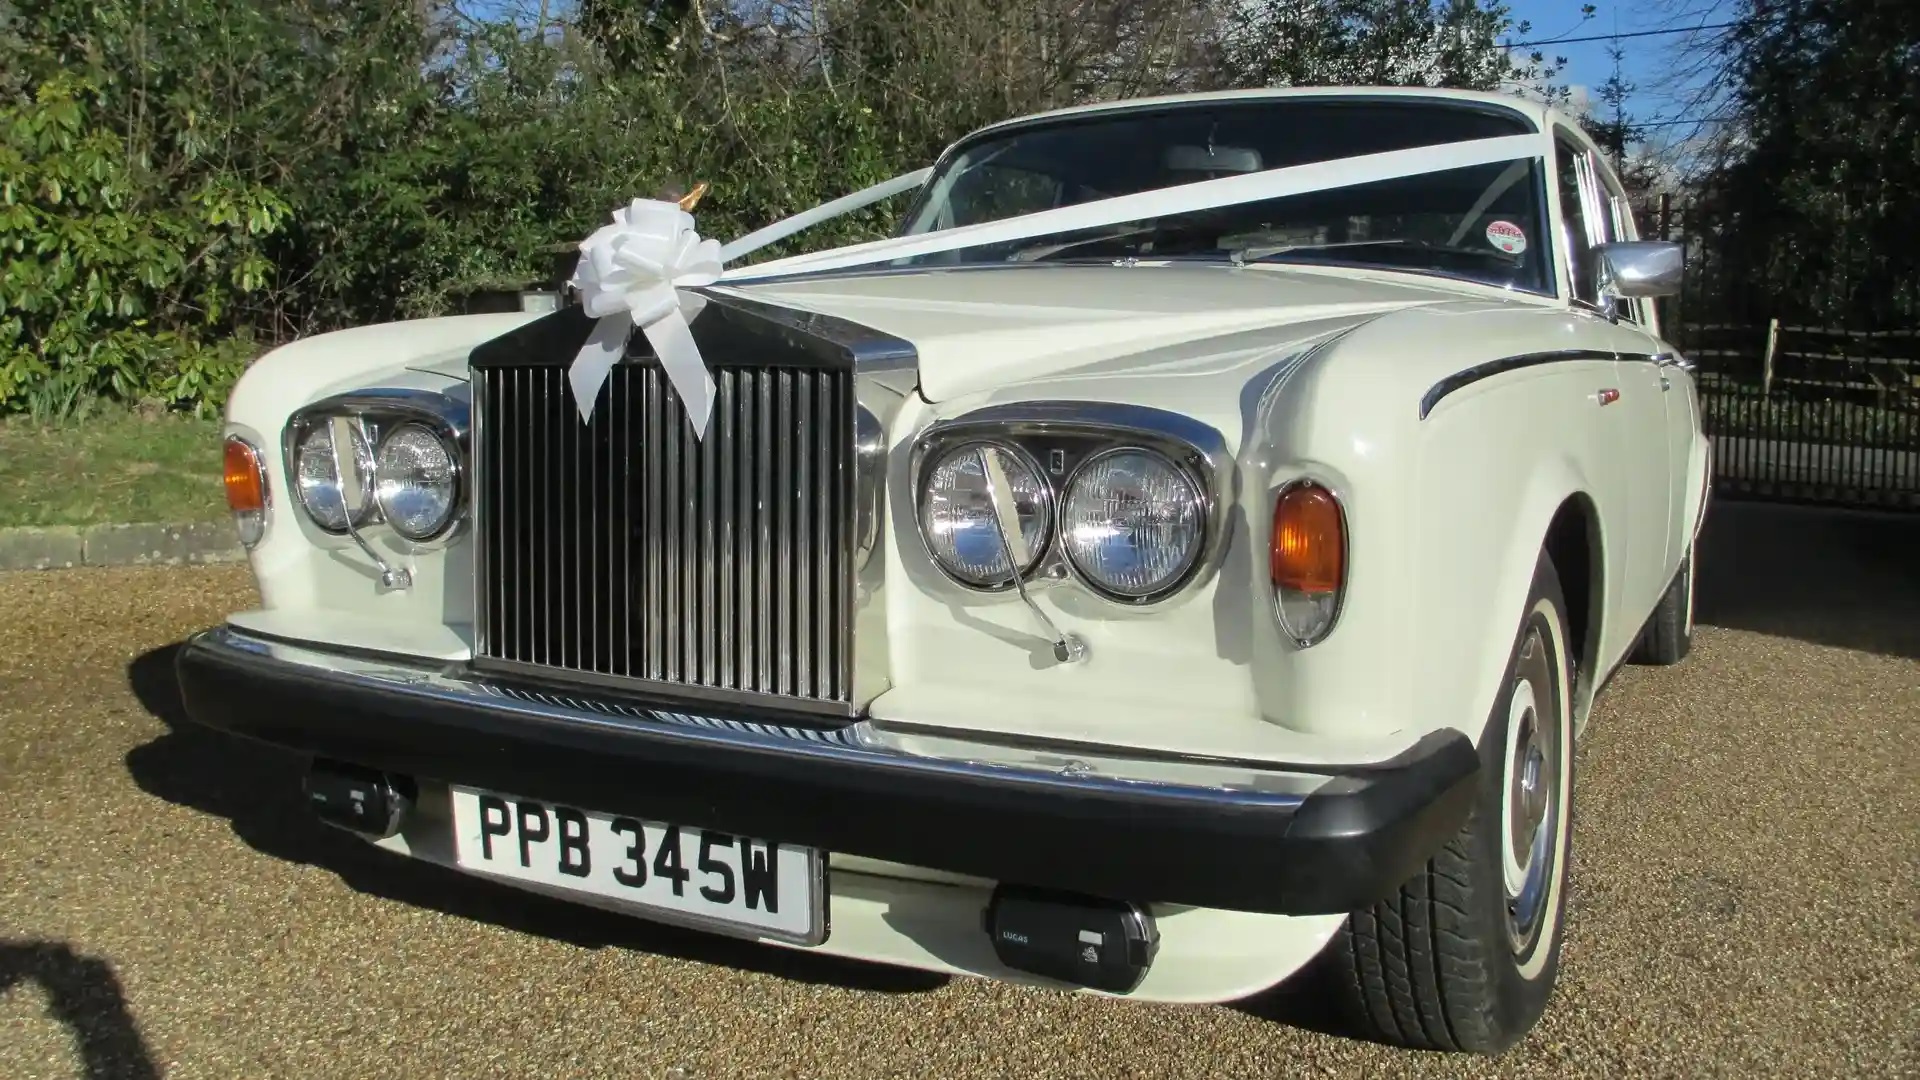 Front Left View of Classic Rolls-Royce showing long Chrome Grill and twin headlight. Large White bow is fixed to the Spirit of ecstasy standing on top of the grill